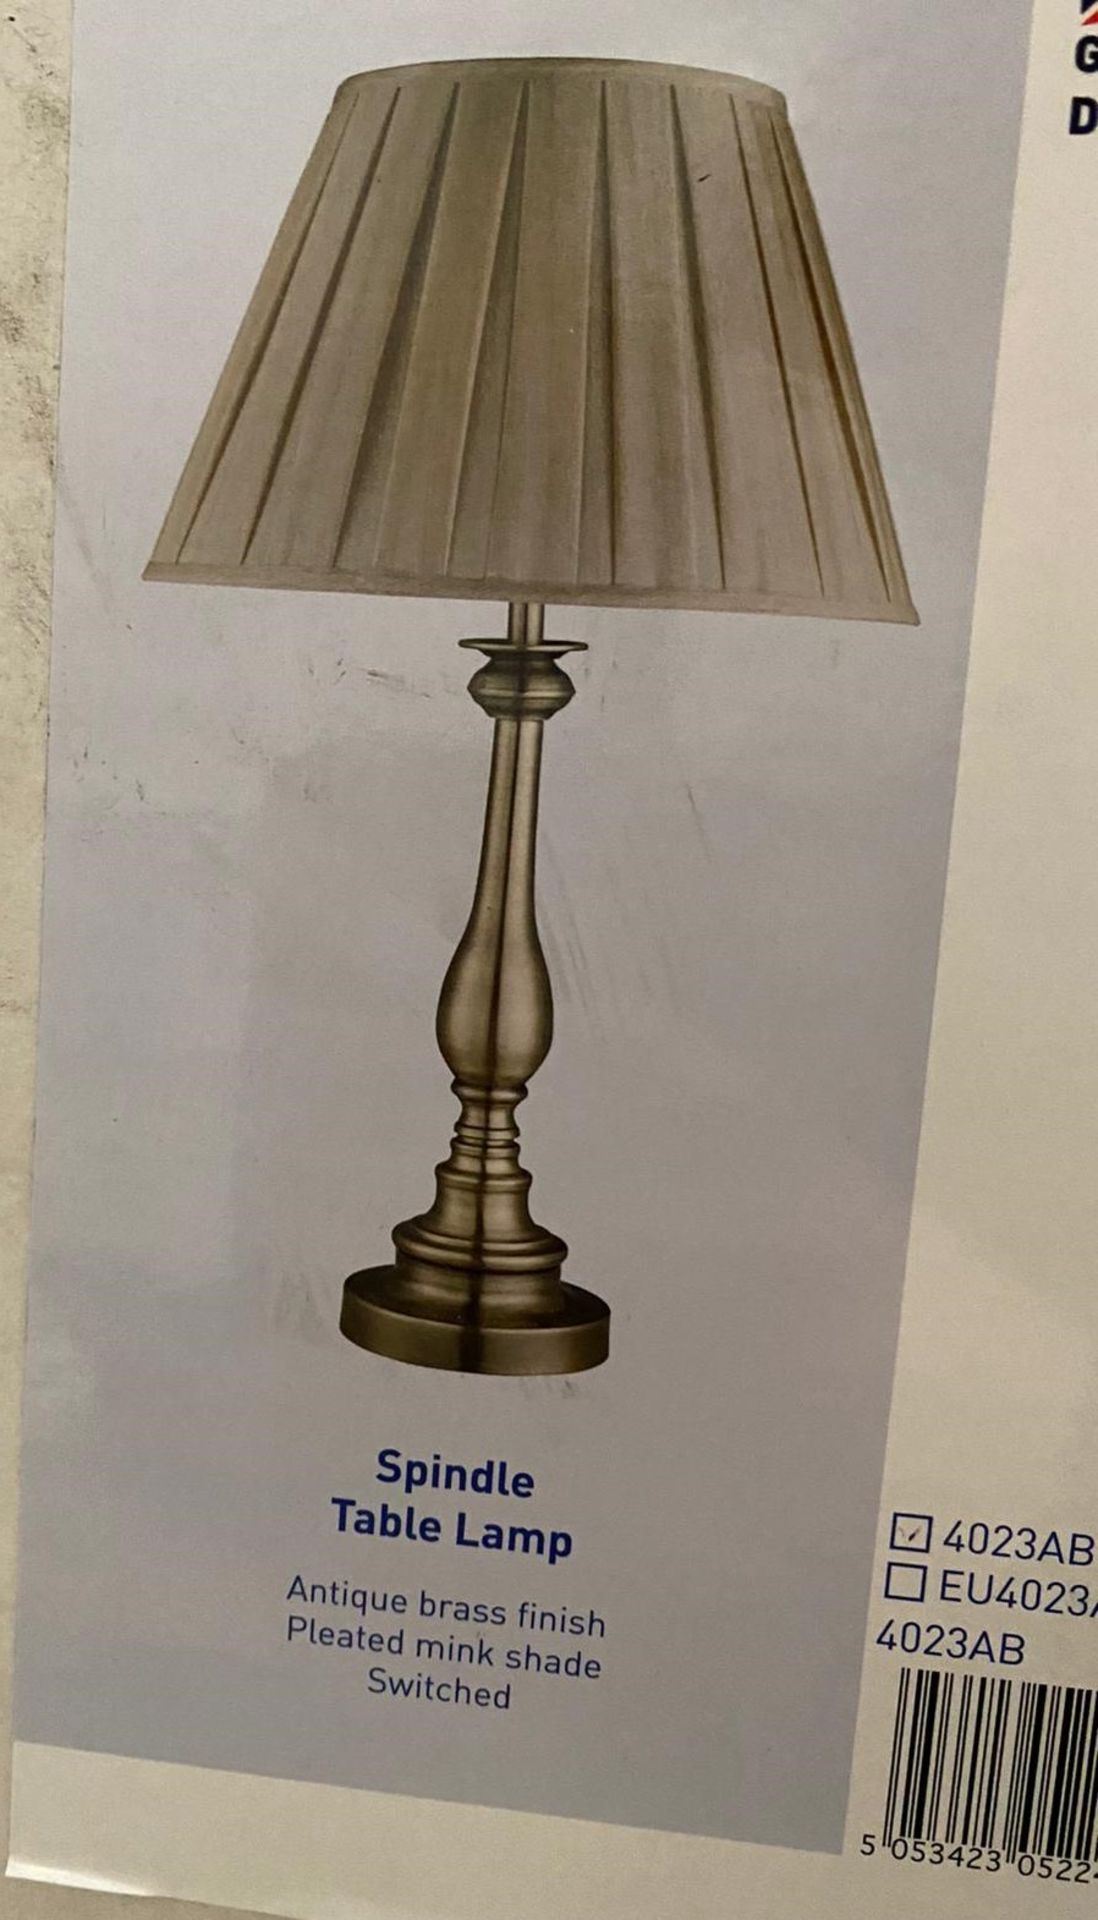 1 x Searchlight Spindle Table Lamp in Antique Brass - Ref: 4023AB - New and Boxed - RRP: £100 - Image 2 of 4